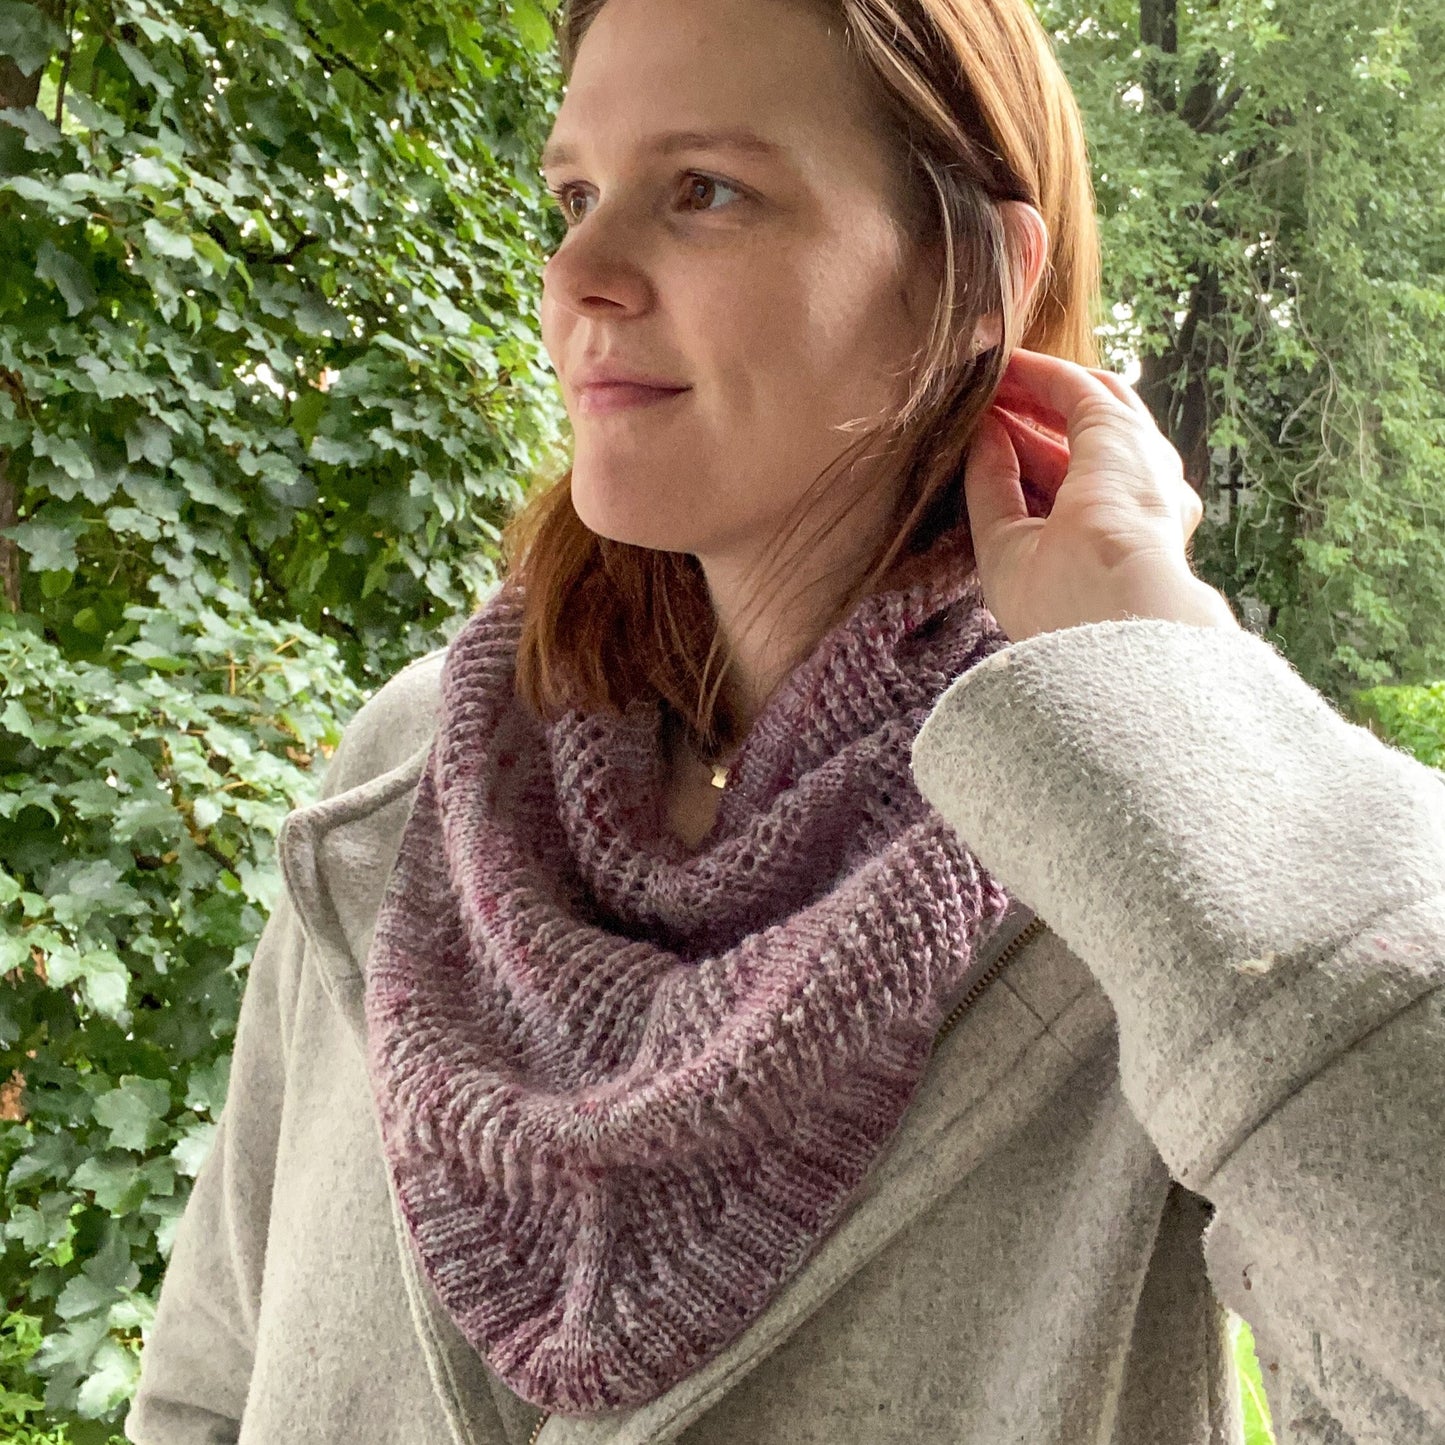 jules, the designer, wearing a lace striped cowl with ribbing in a purple/pink yarn